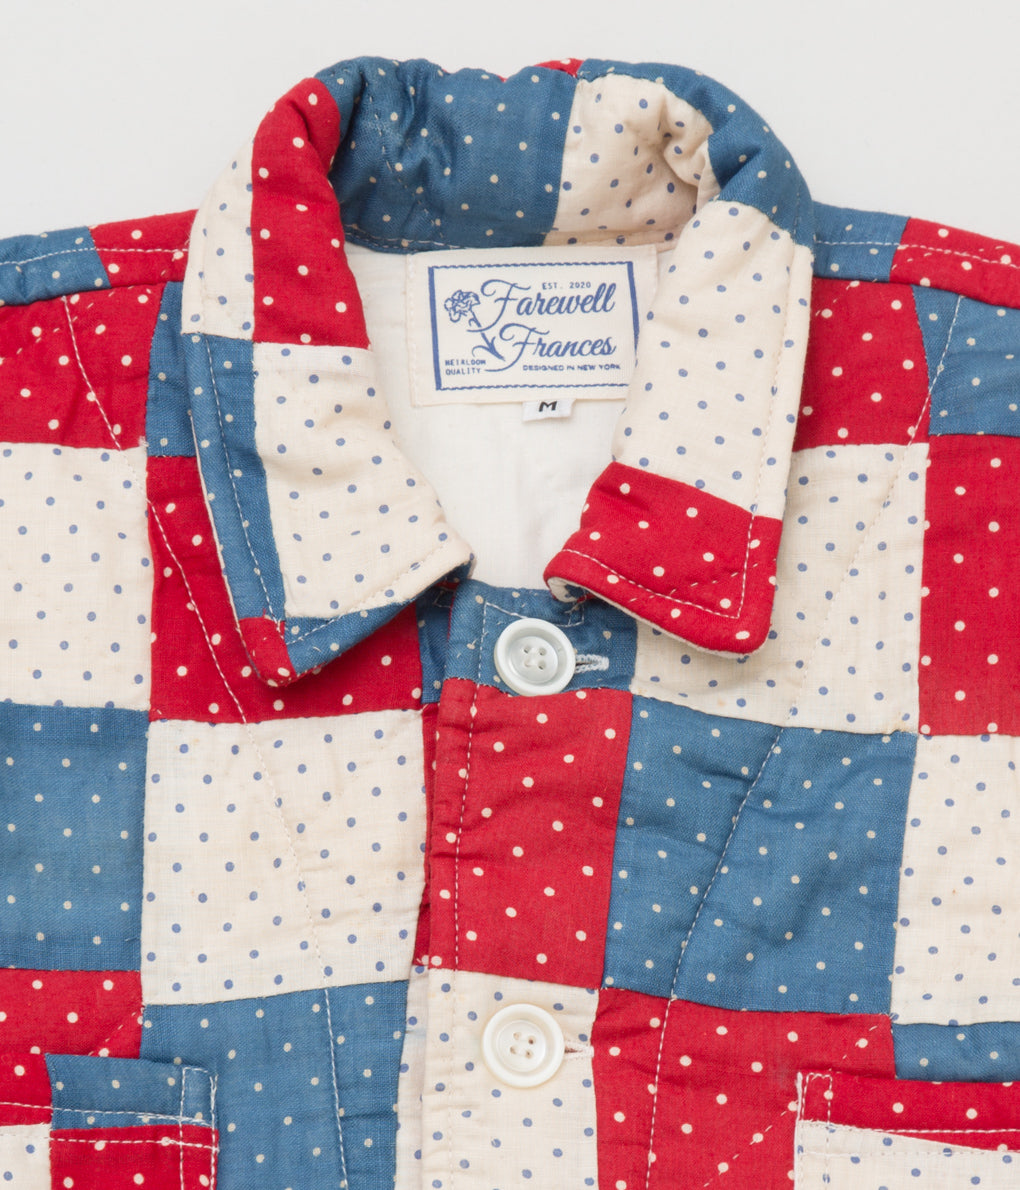 FAREWELL FRANCES "CLAUDE QUILTED COAT" (RED/BLUE MULTI)